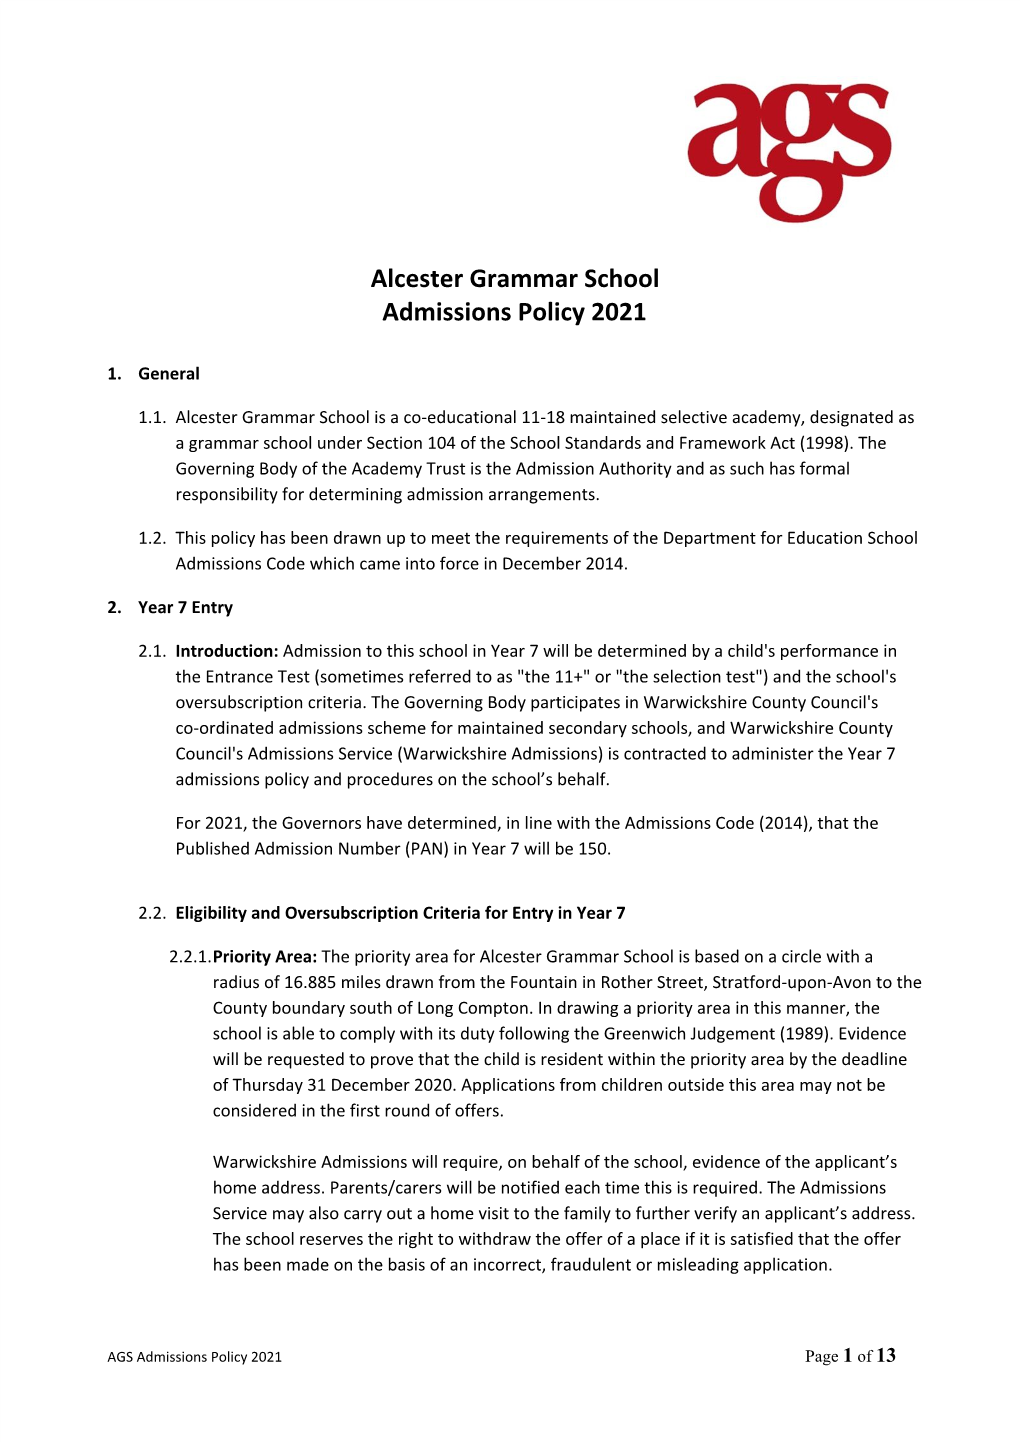 Alcester Grammar School Admissions Policy 2021